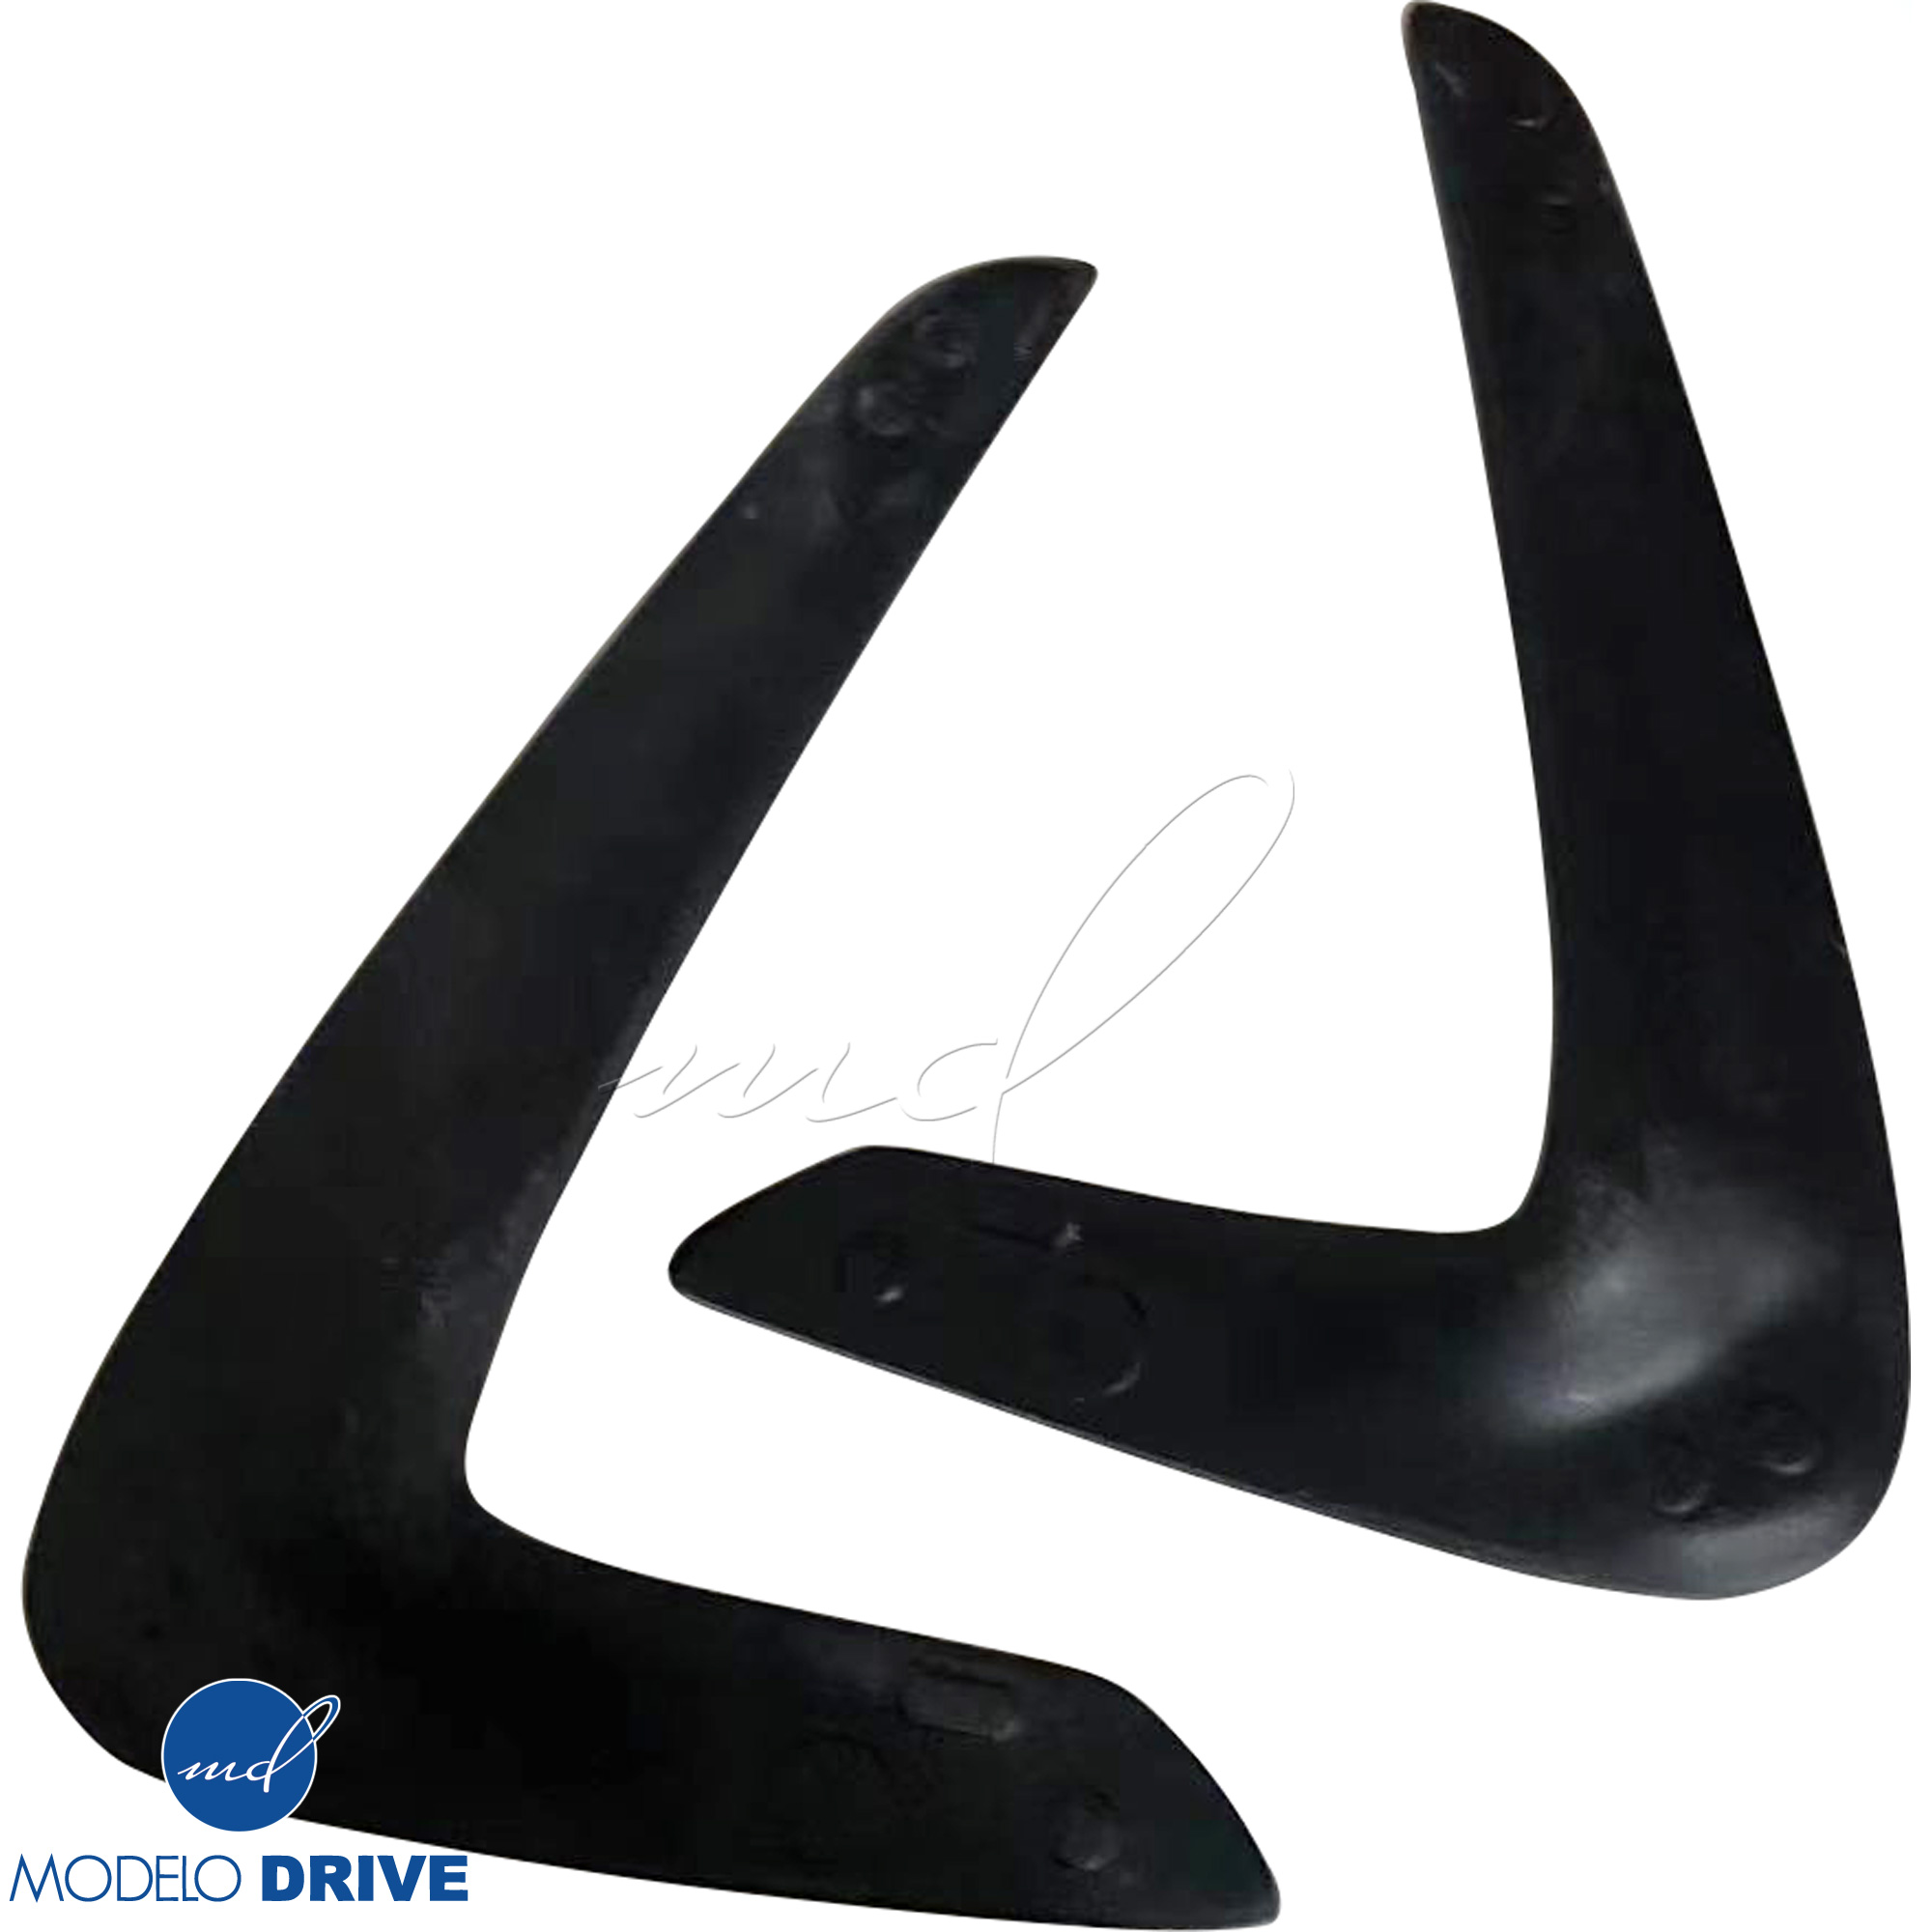 ModeloDrive FRP LBPE Fender Vent Accents (front) > BMW 4-Series F32 2014-2020 - Image 3